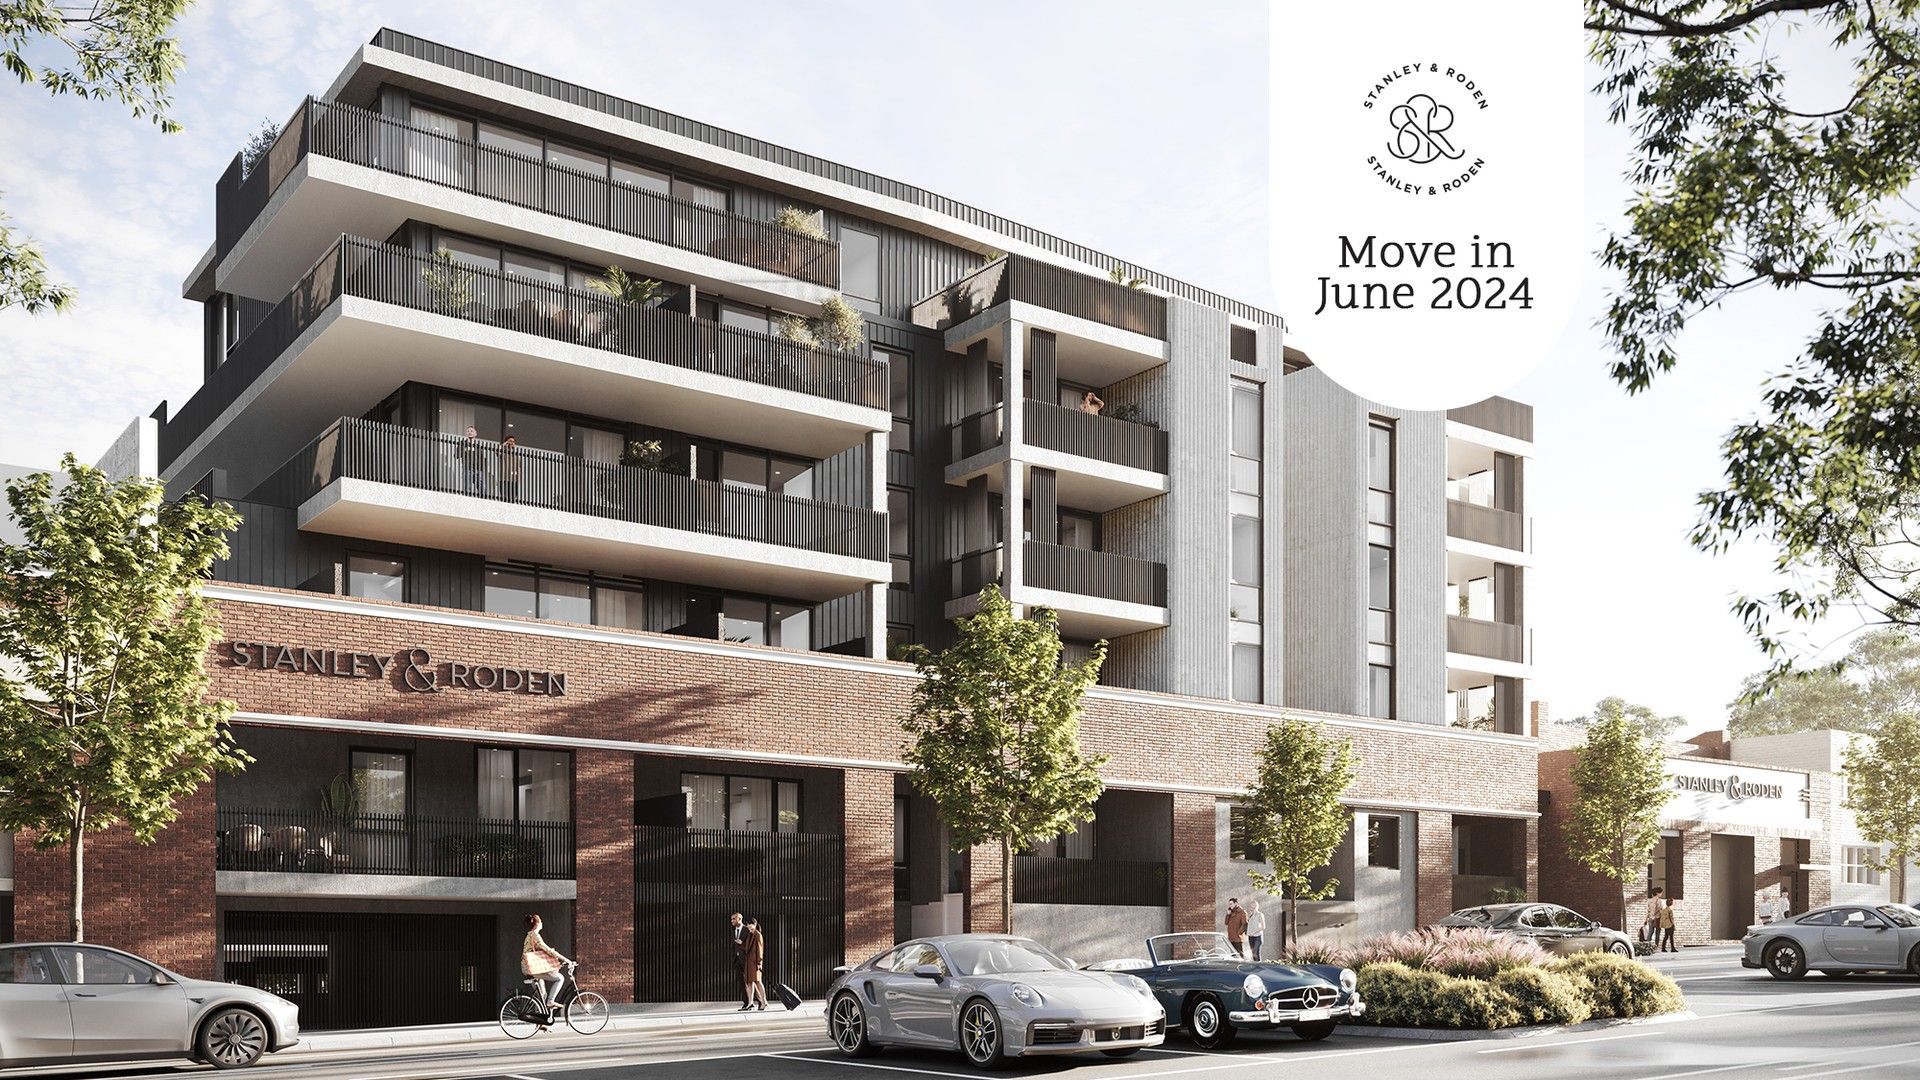 2 bedrooms New Apartments / Off the Plan in 111/218-228 Stanley Street WEST MELBOURNE VIC, 3003